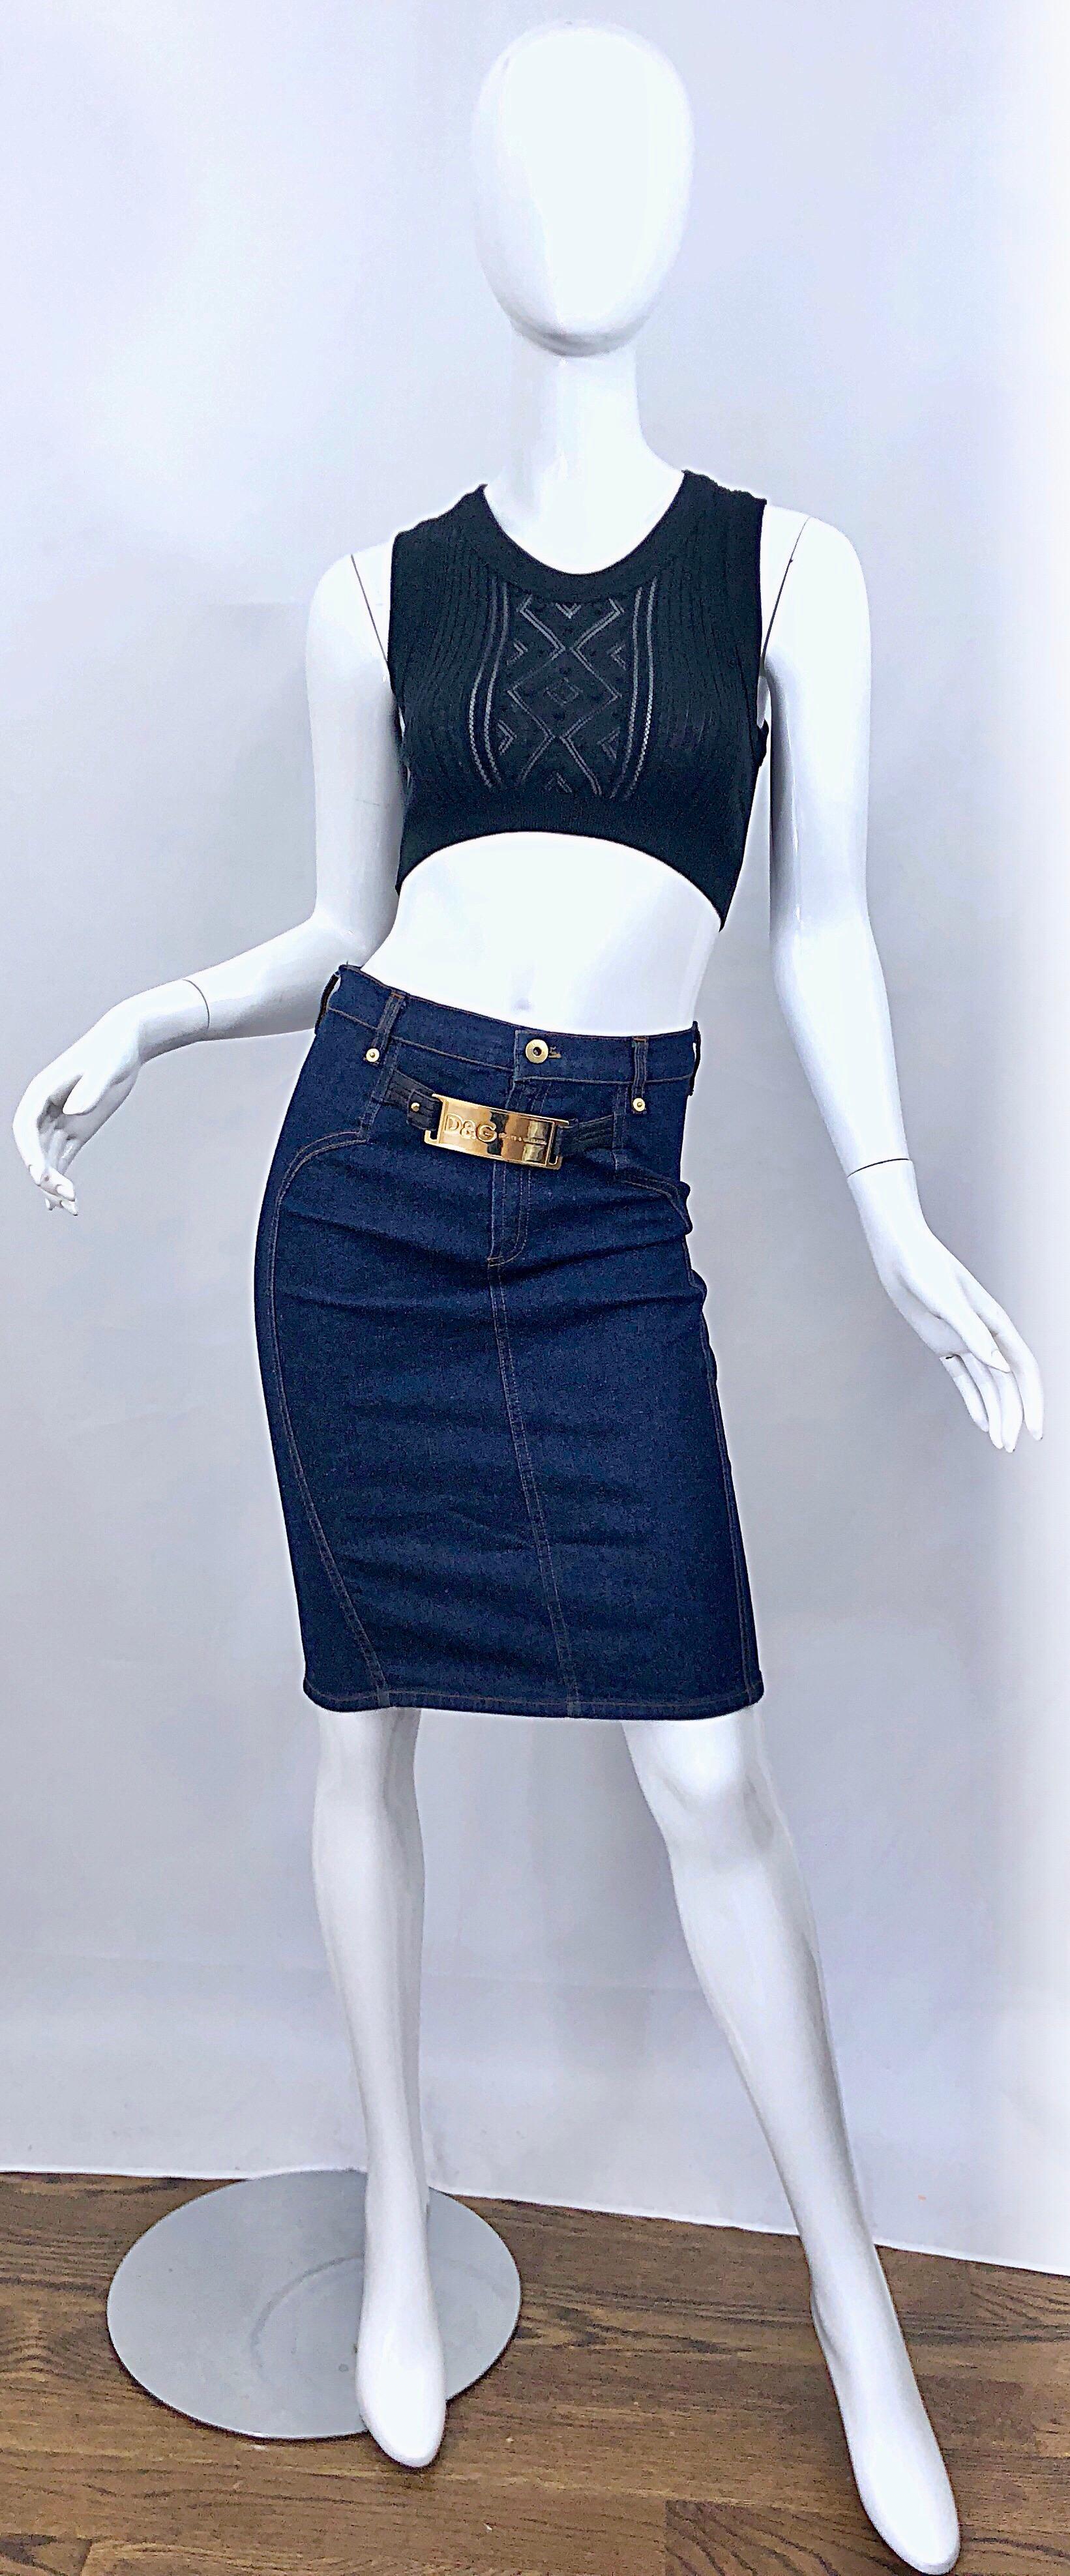 Iconic and sexy late 90s / early 2000s DOLCE & GABBANA blue jean denim high waisted bodycon pencil skirt. Features a gold logo embossed buckle attached to black leather straps. Button at center waistband, with metal zipper fly. 96% Cotton 4%